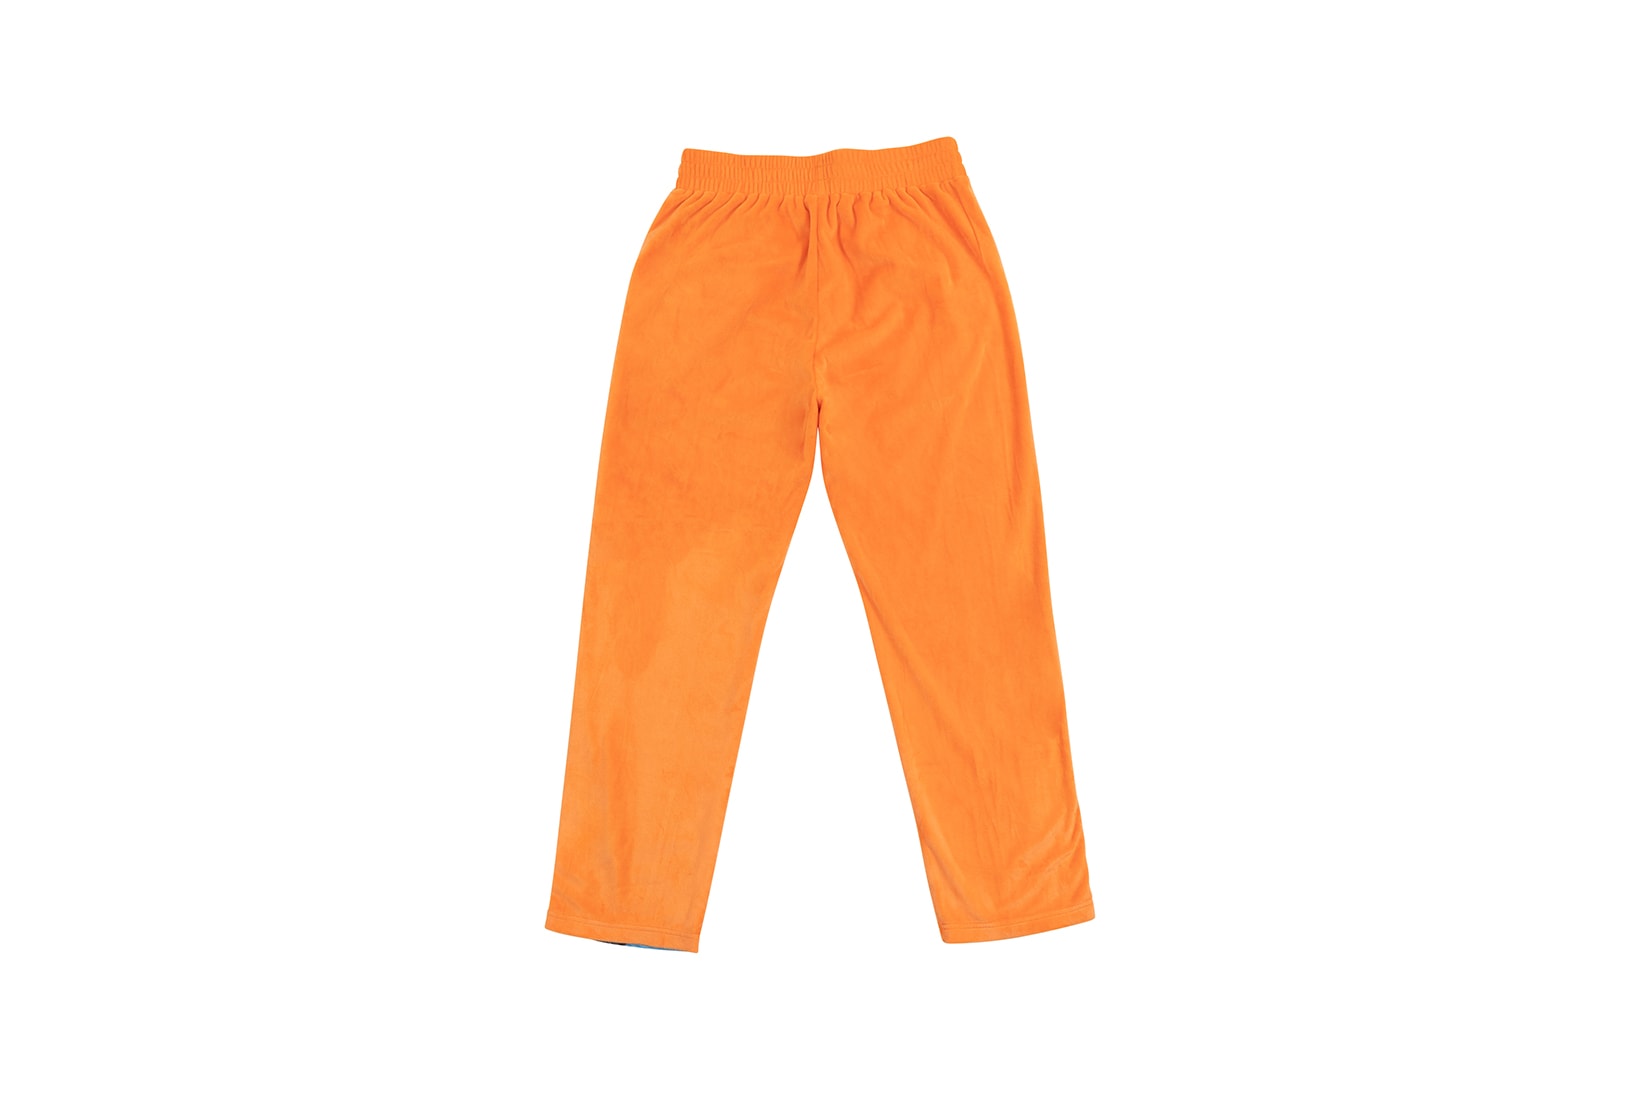 tier project 3 joy to the world collection orange pants back